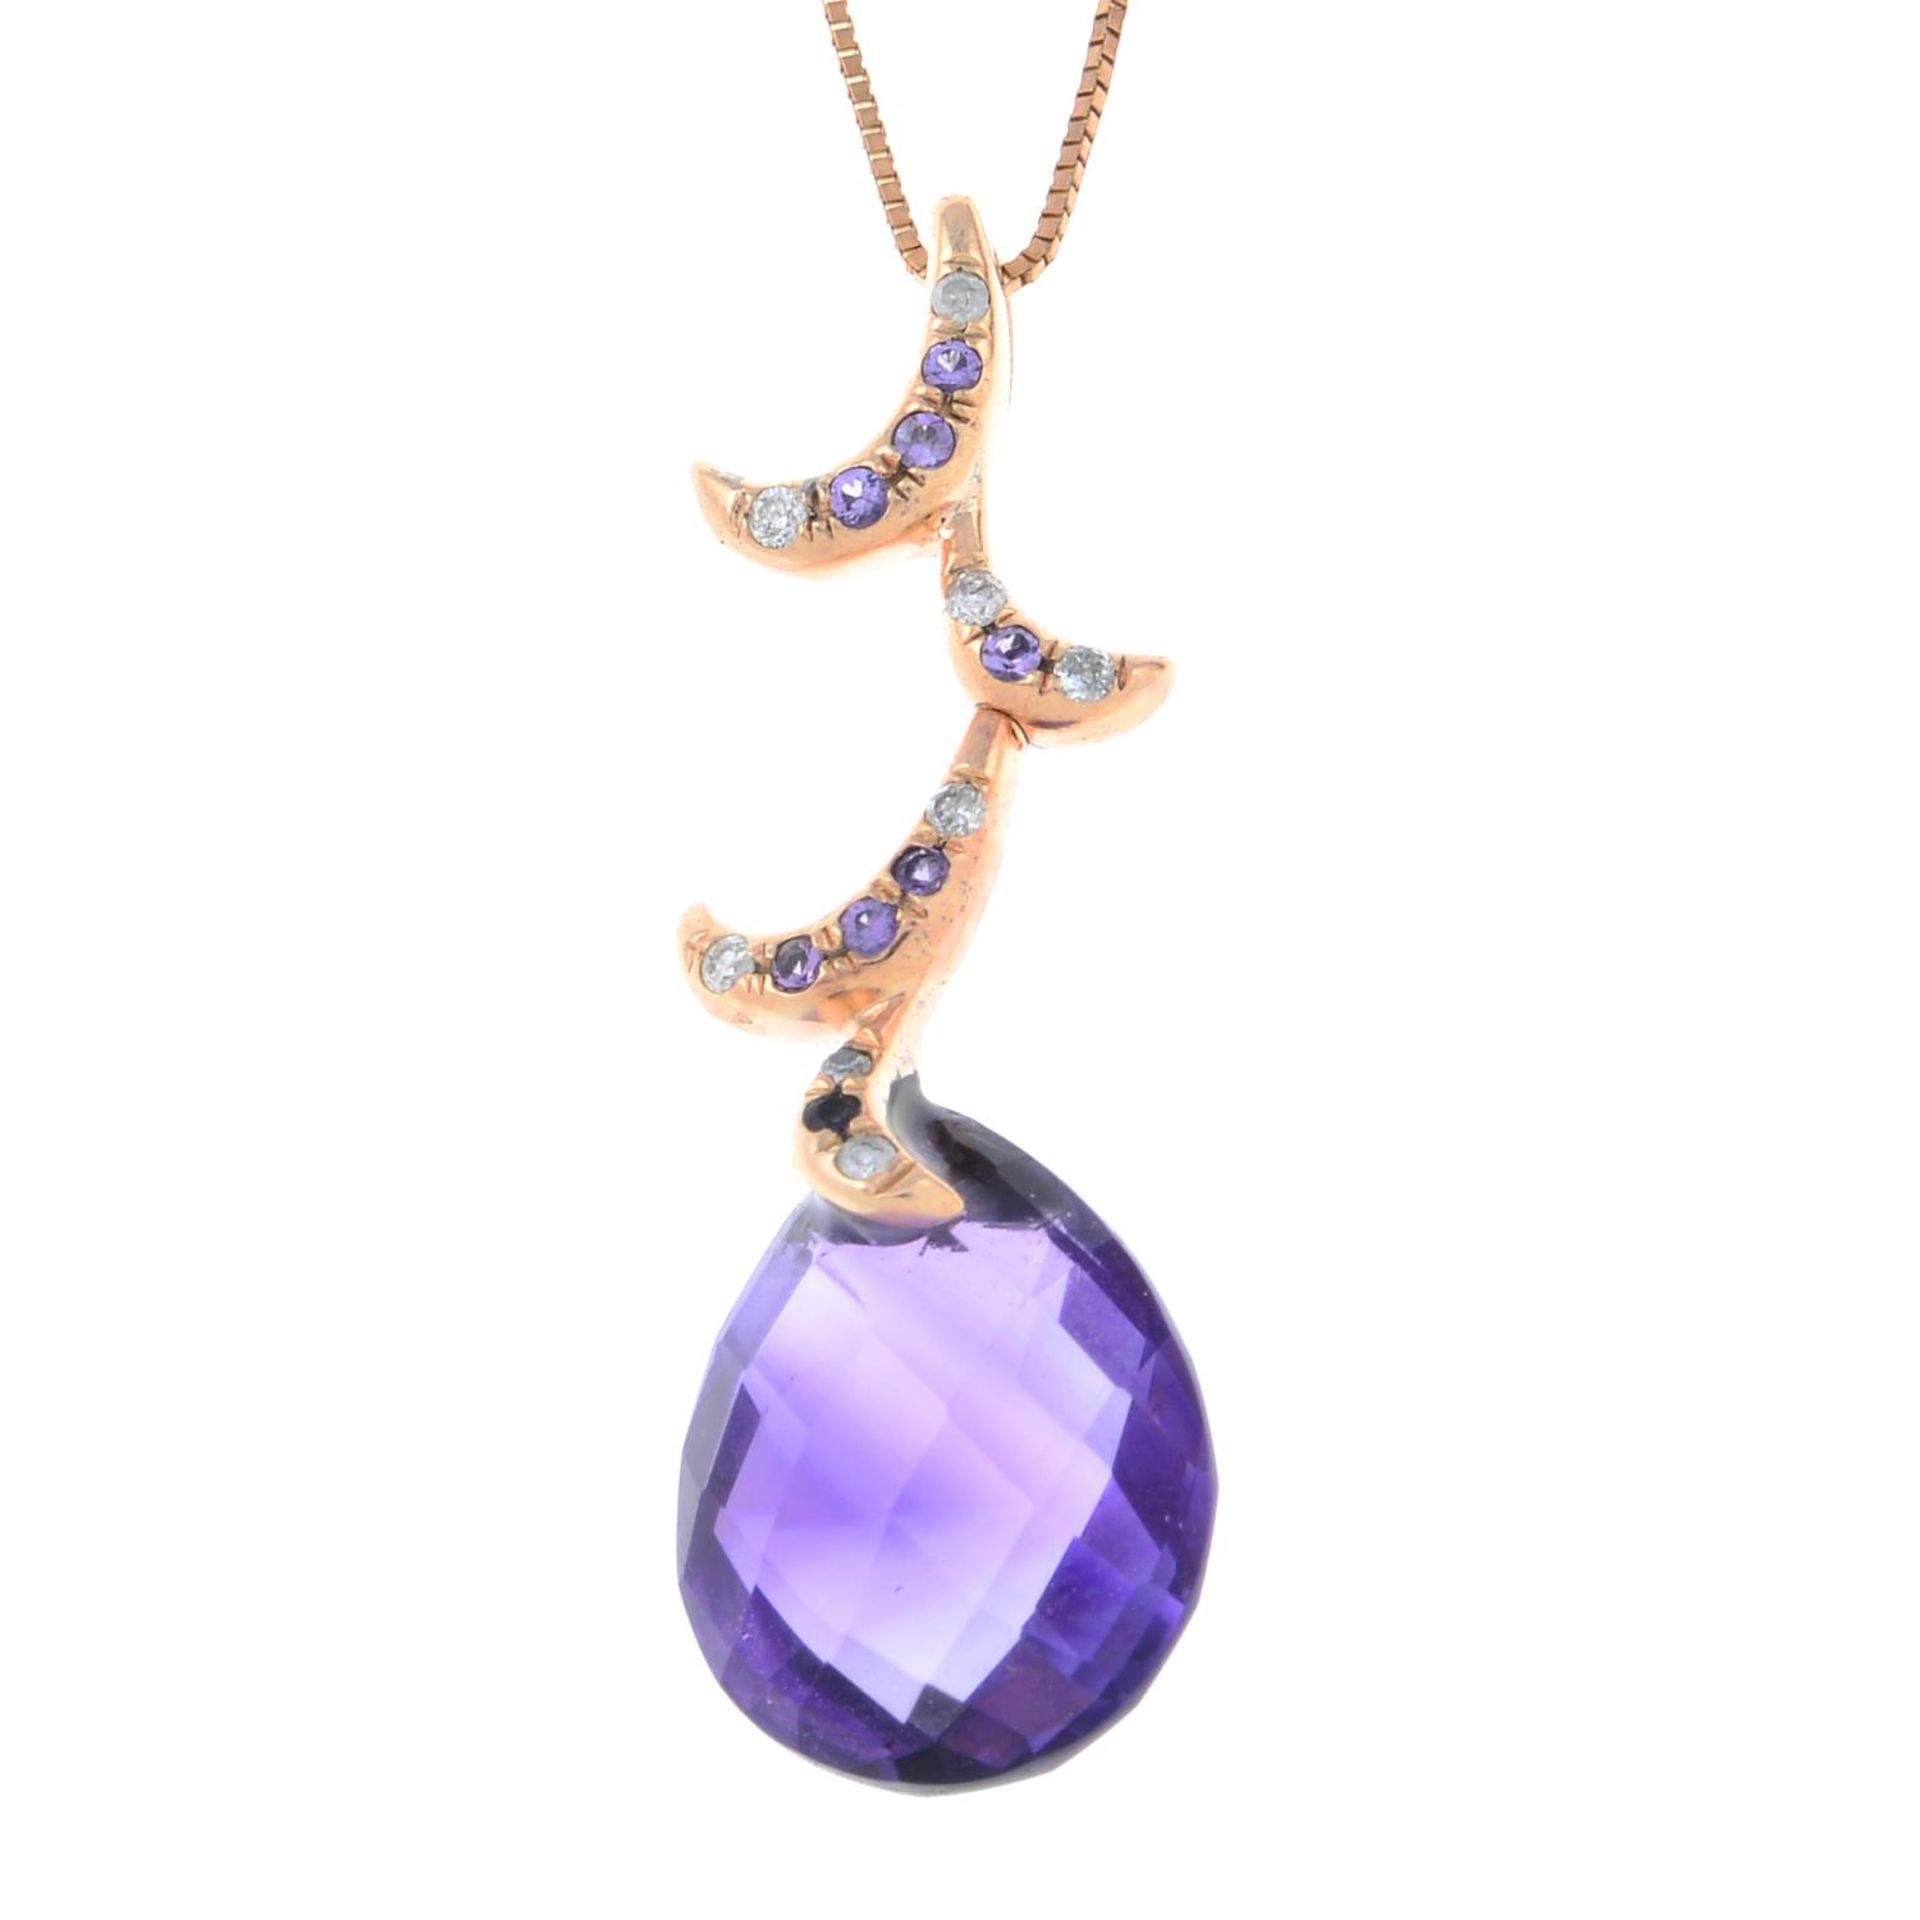 An amethyst and diamond pendant, with 18ct gold chain.Chain with hallmarks for 18ct gold.